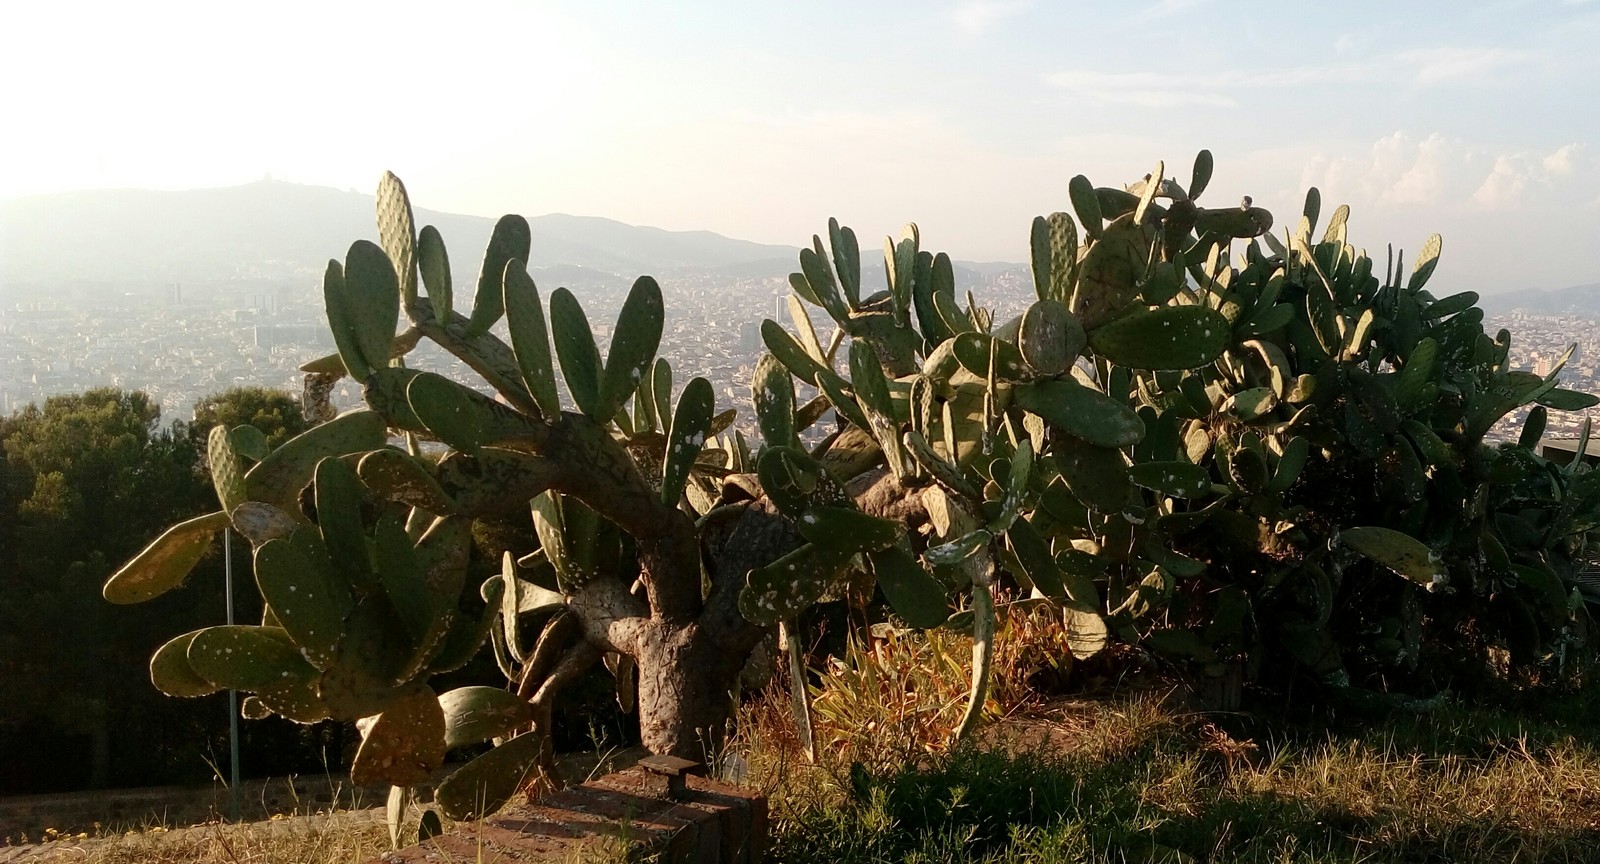 cacti on top - The mountains, Cactus, My